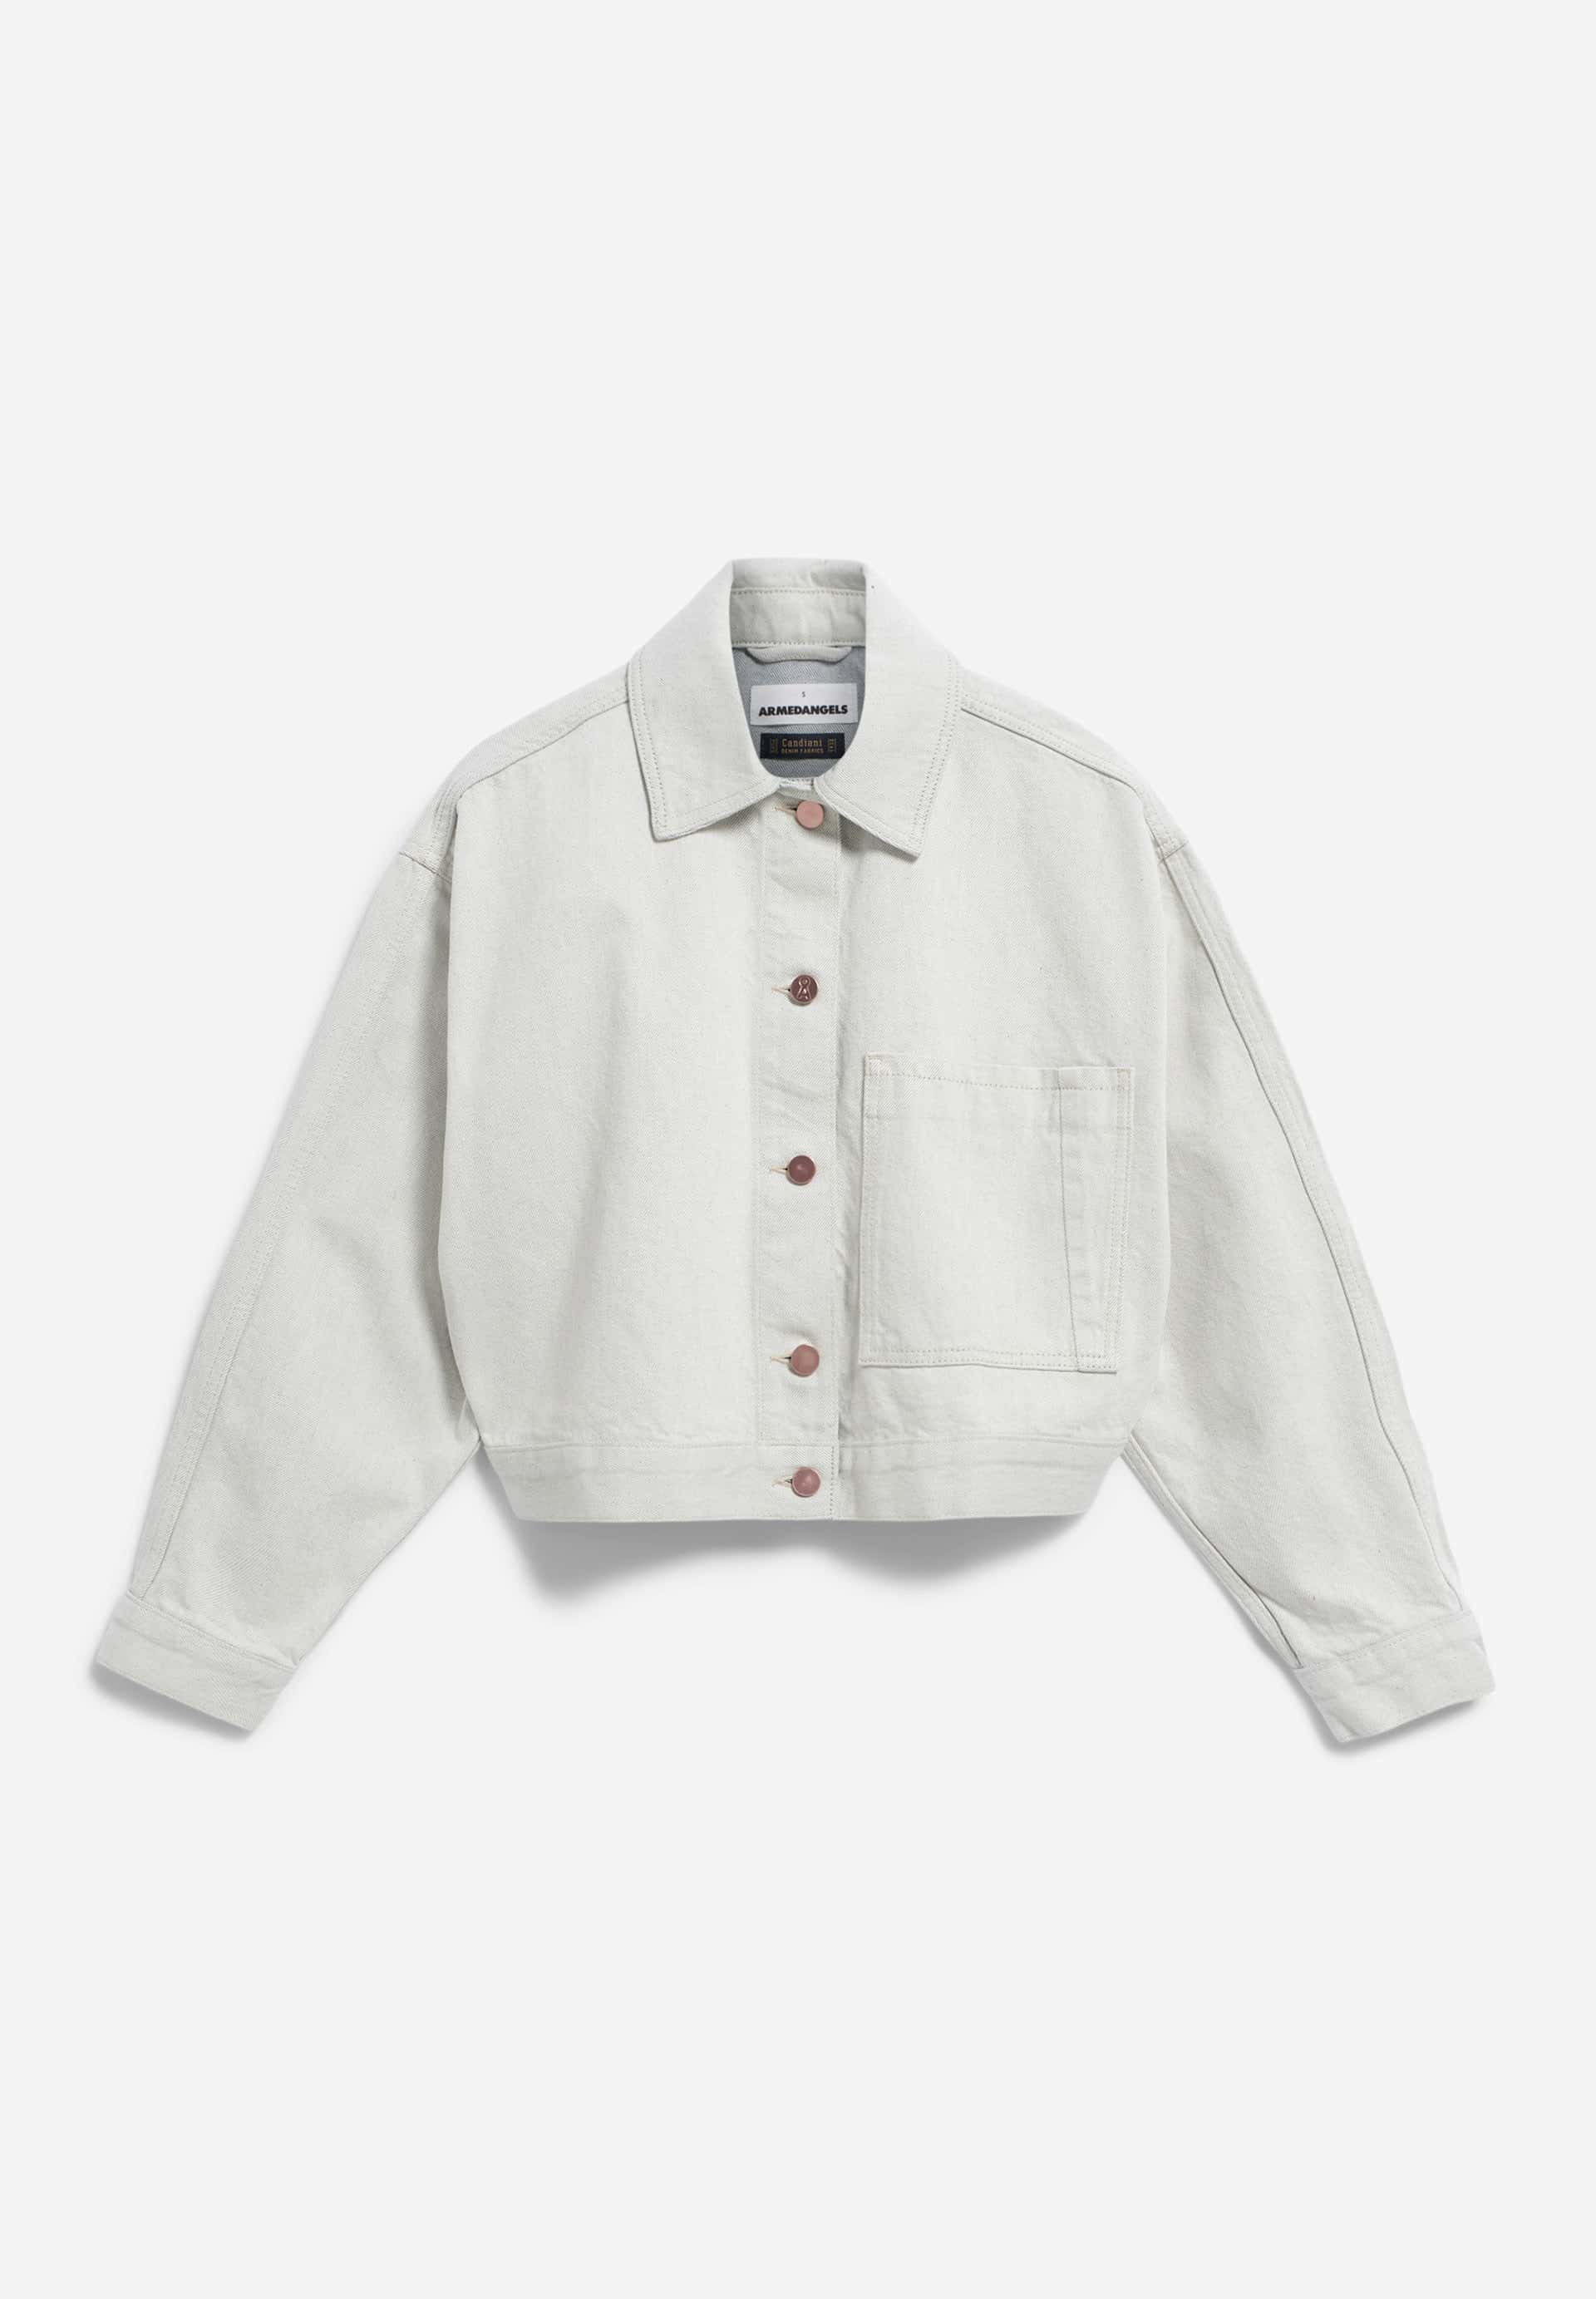 FILEAA Denim Jacket Relaxed Fit made of Organic Cotton Mix